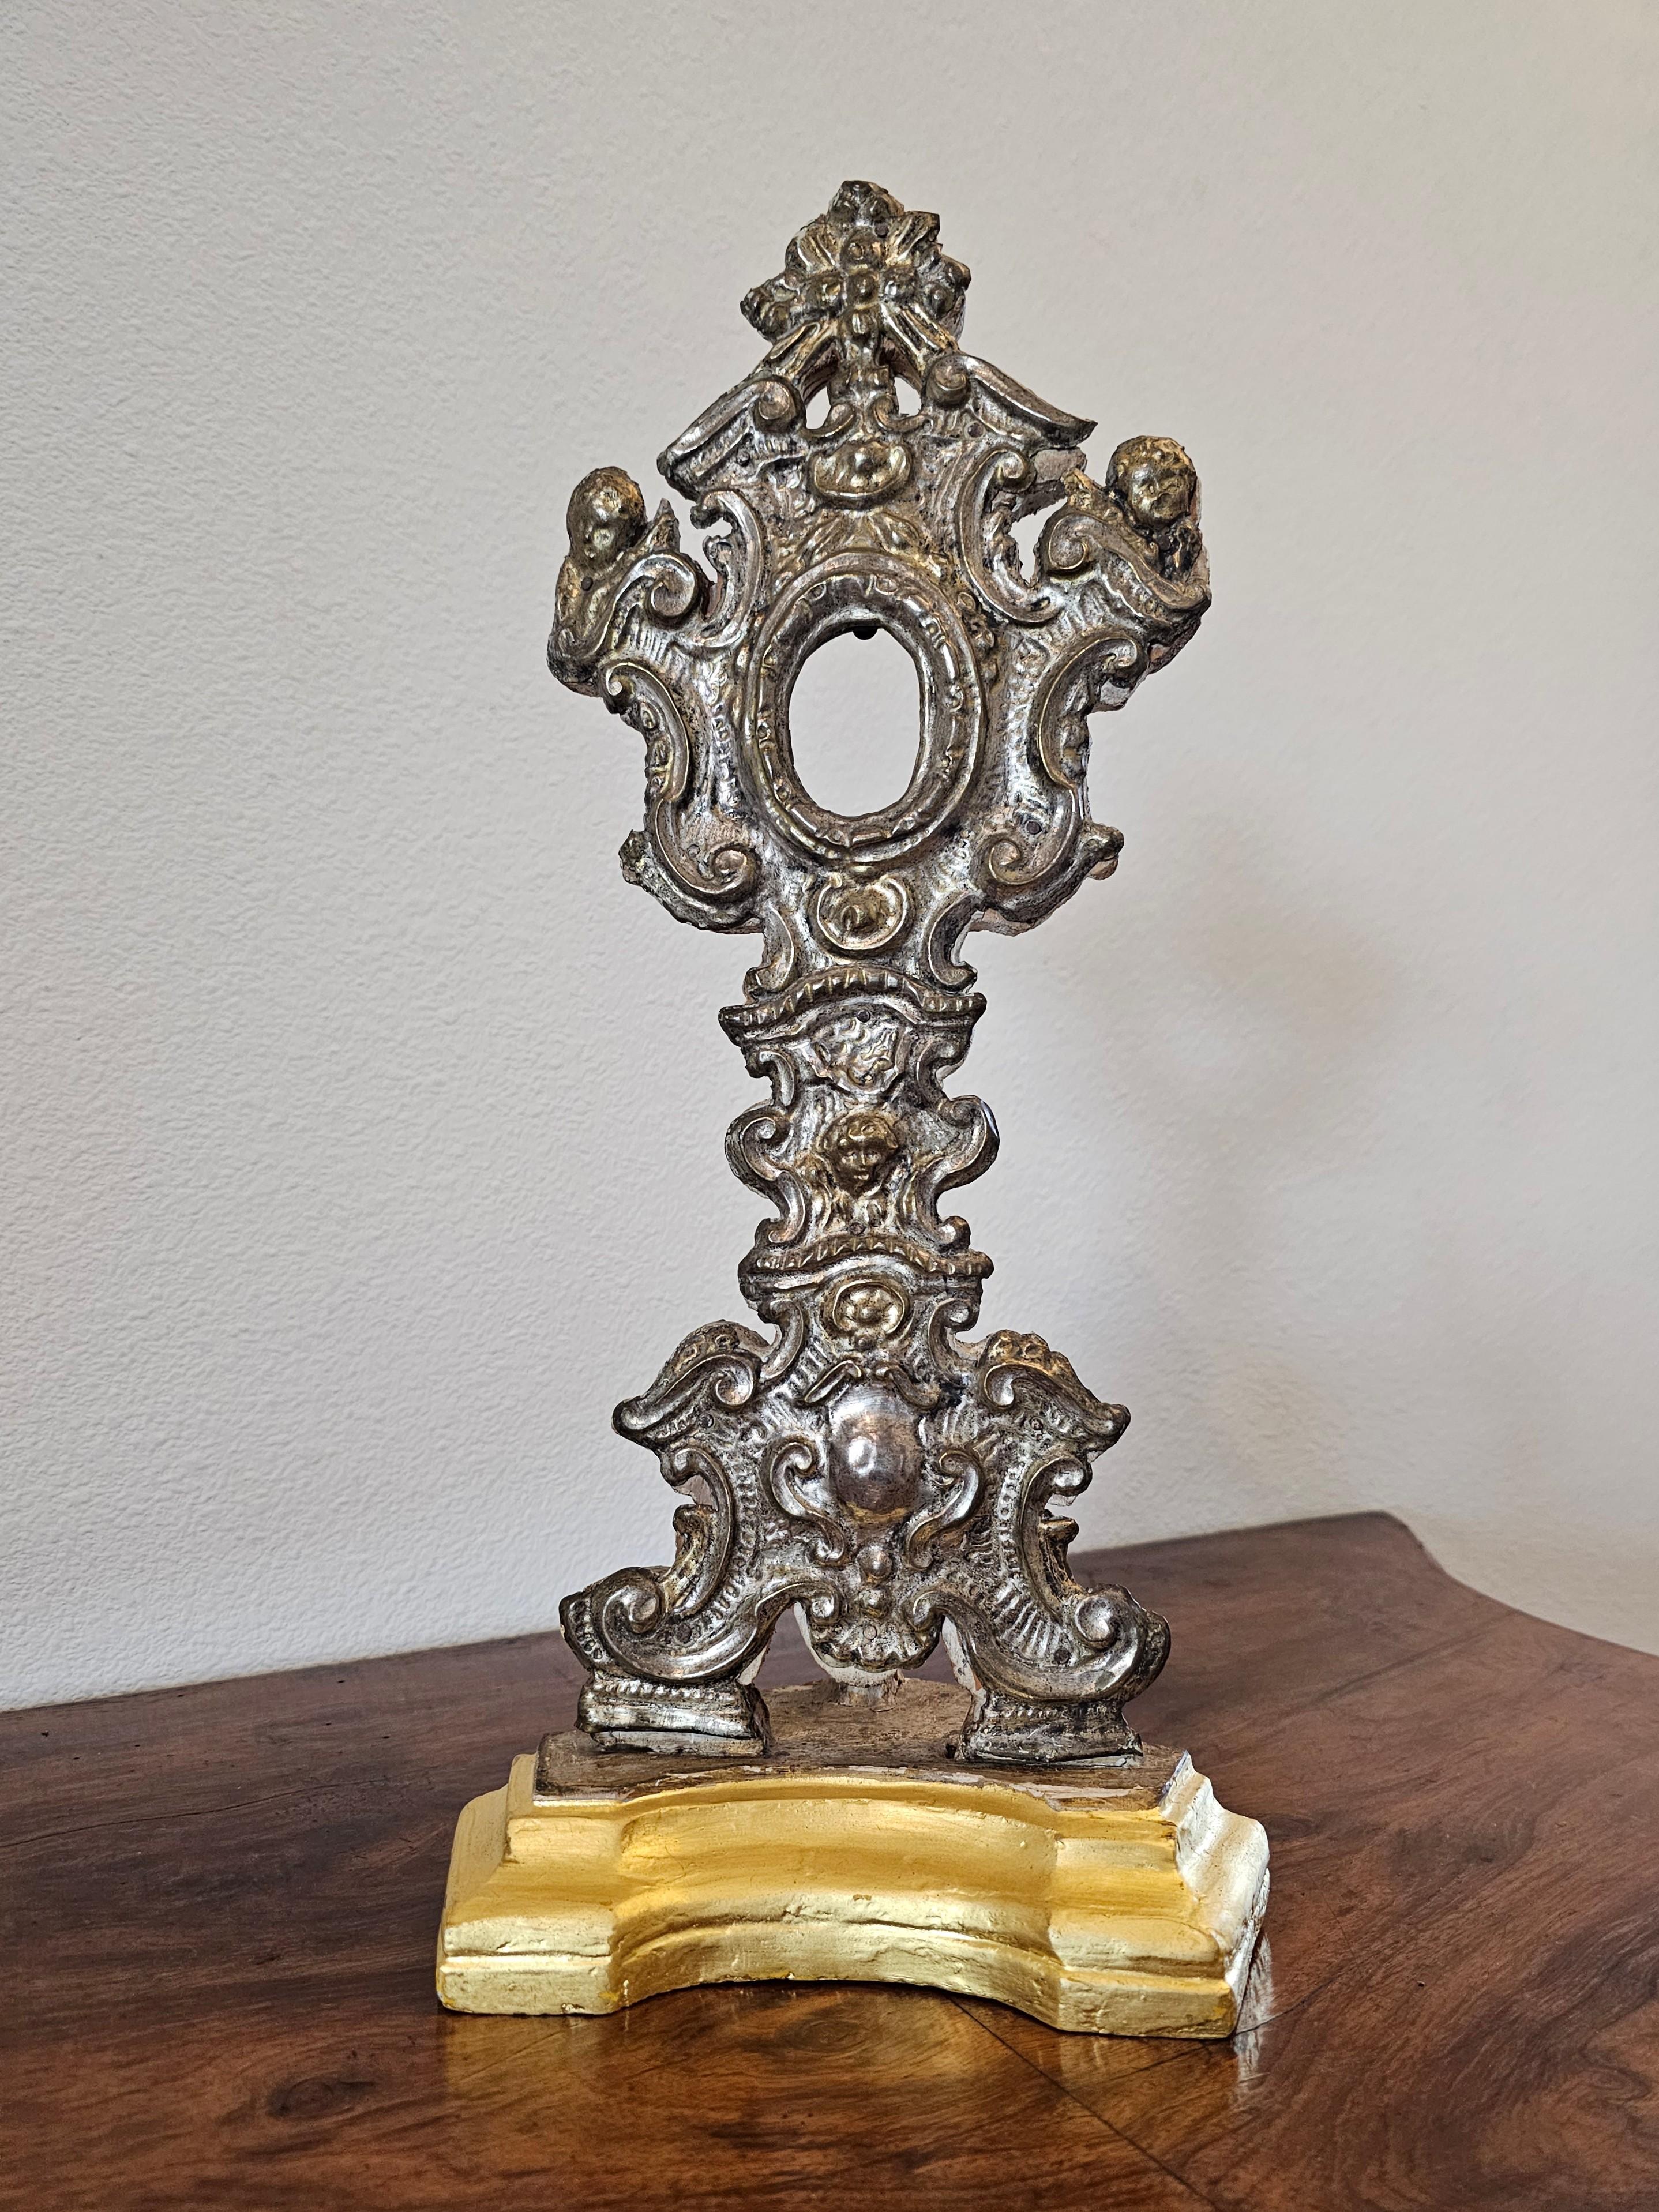 Gilt 18th/19th Century Italian Baroque Silvered Metal Altar Monstrance Reliquary For Sale